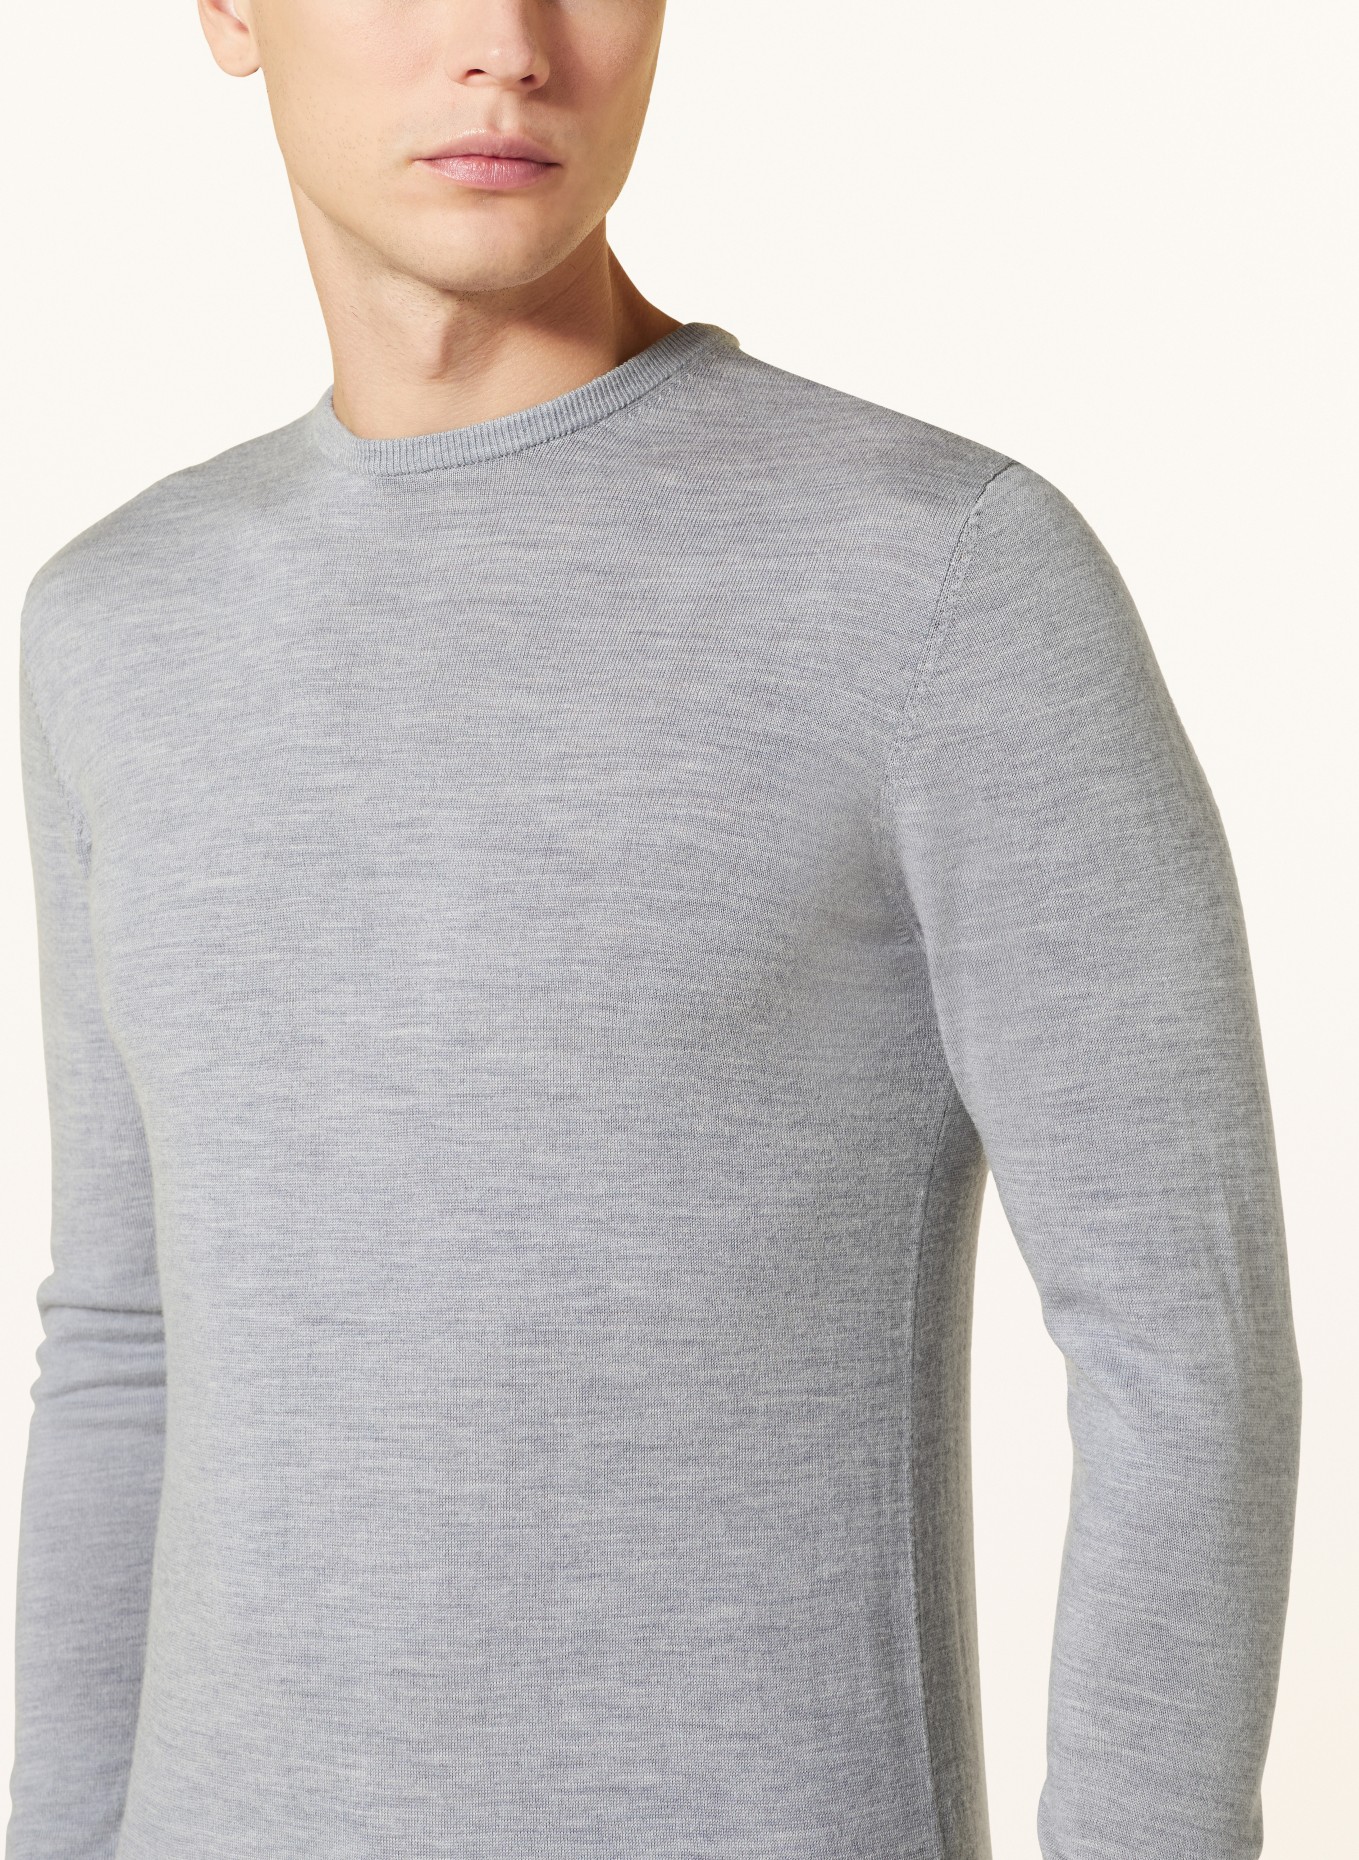 PROFUOMO Sweater made of merino wool, Color: GRAY (Image 4)